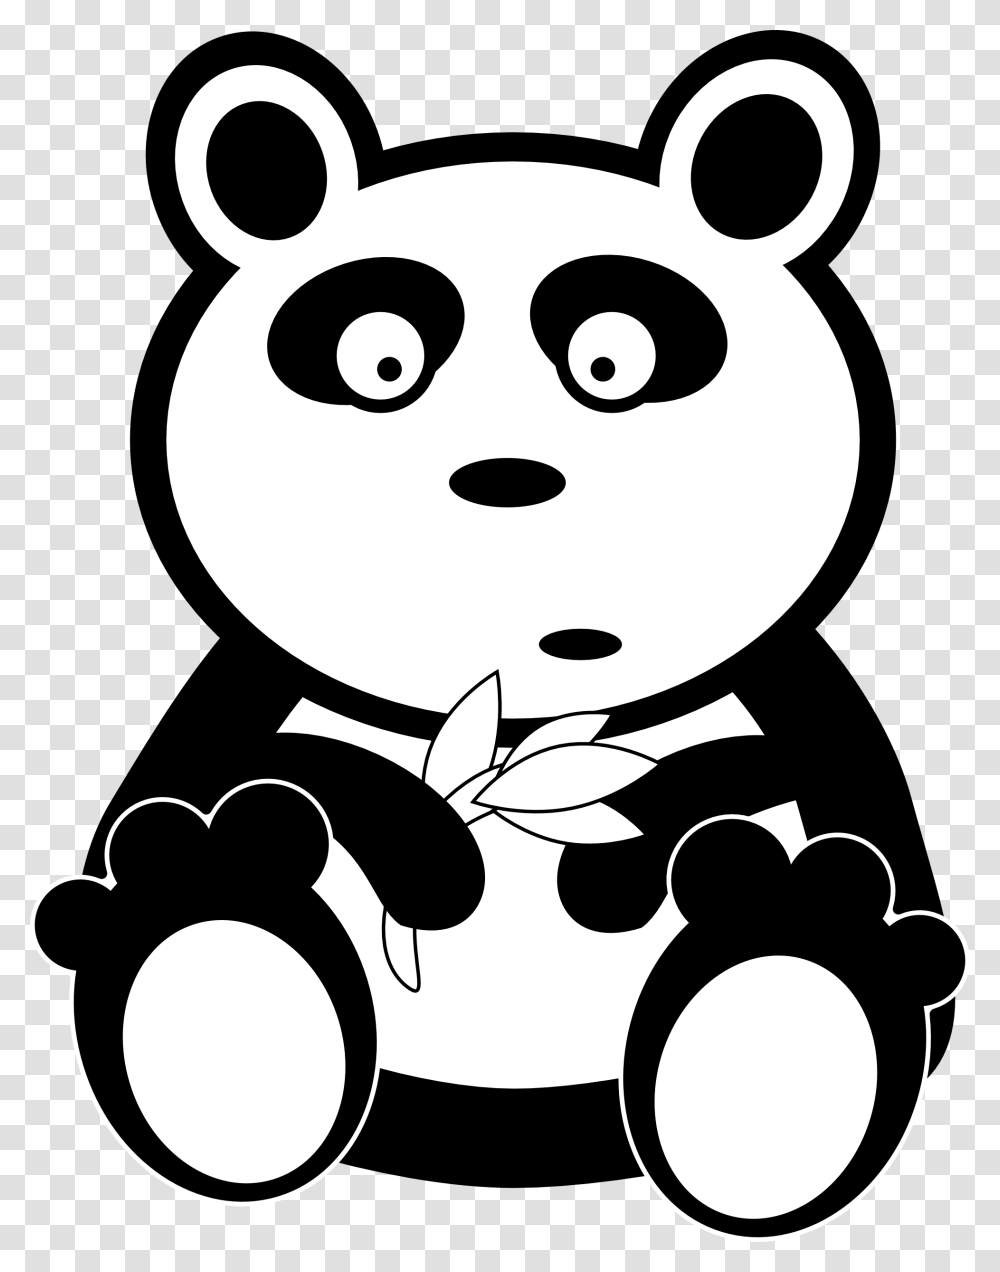 Collection Of Panda Clipart Black And White Panda Clipart Black And White, Stencil, Face Transparent Png